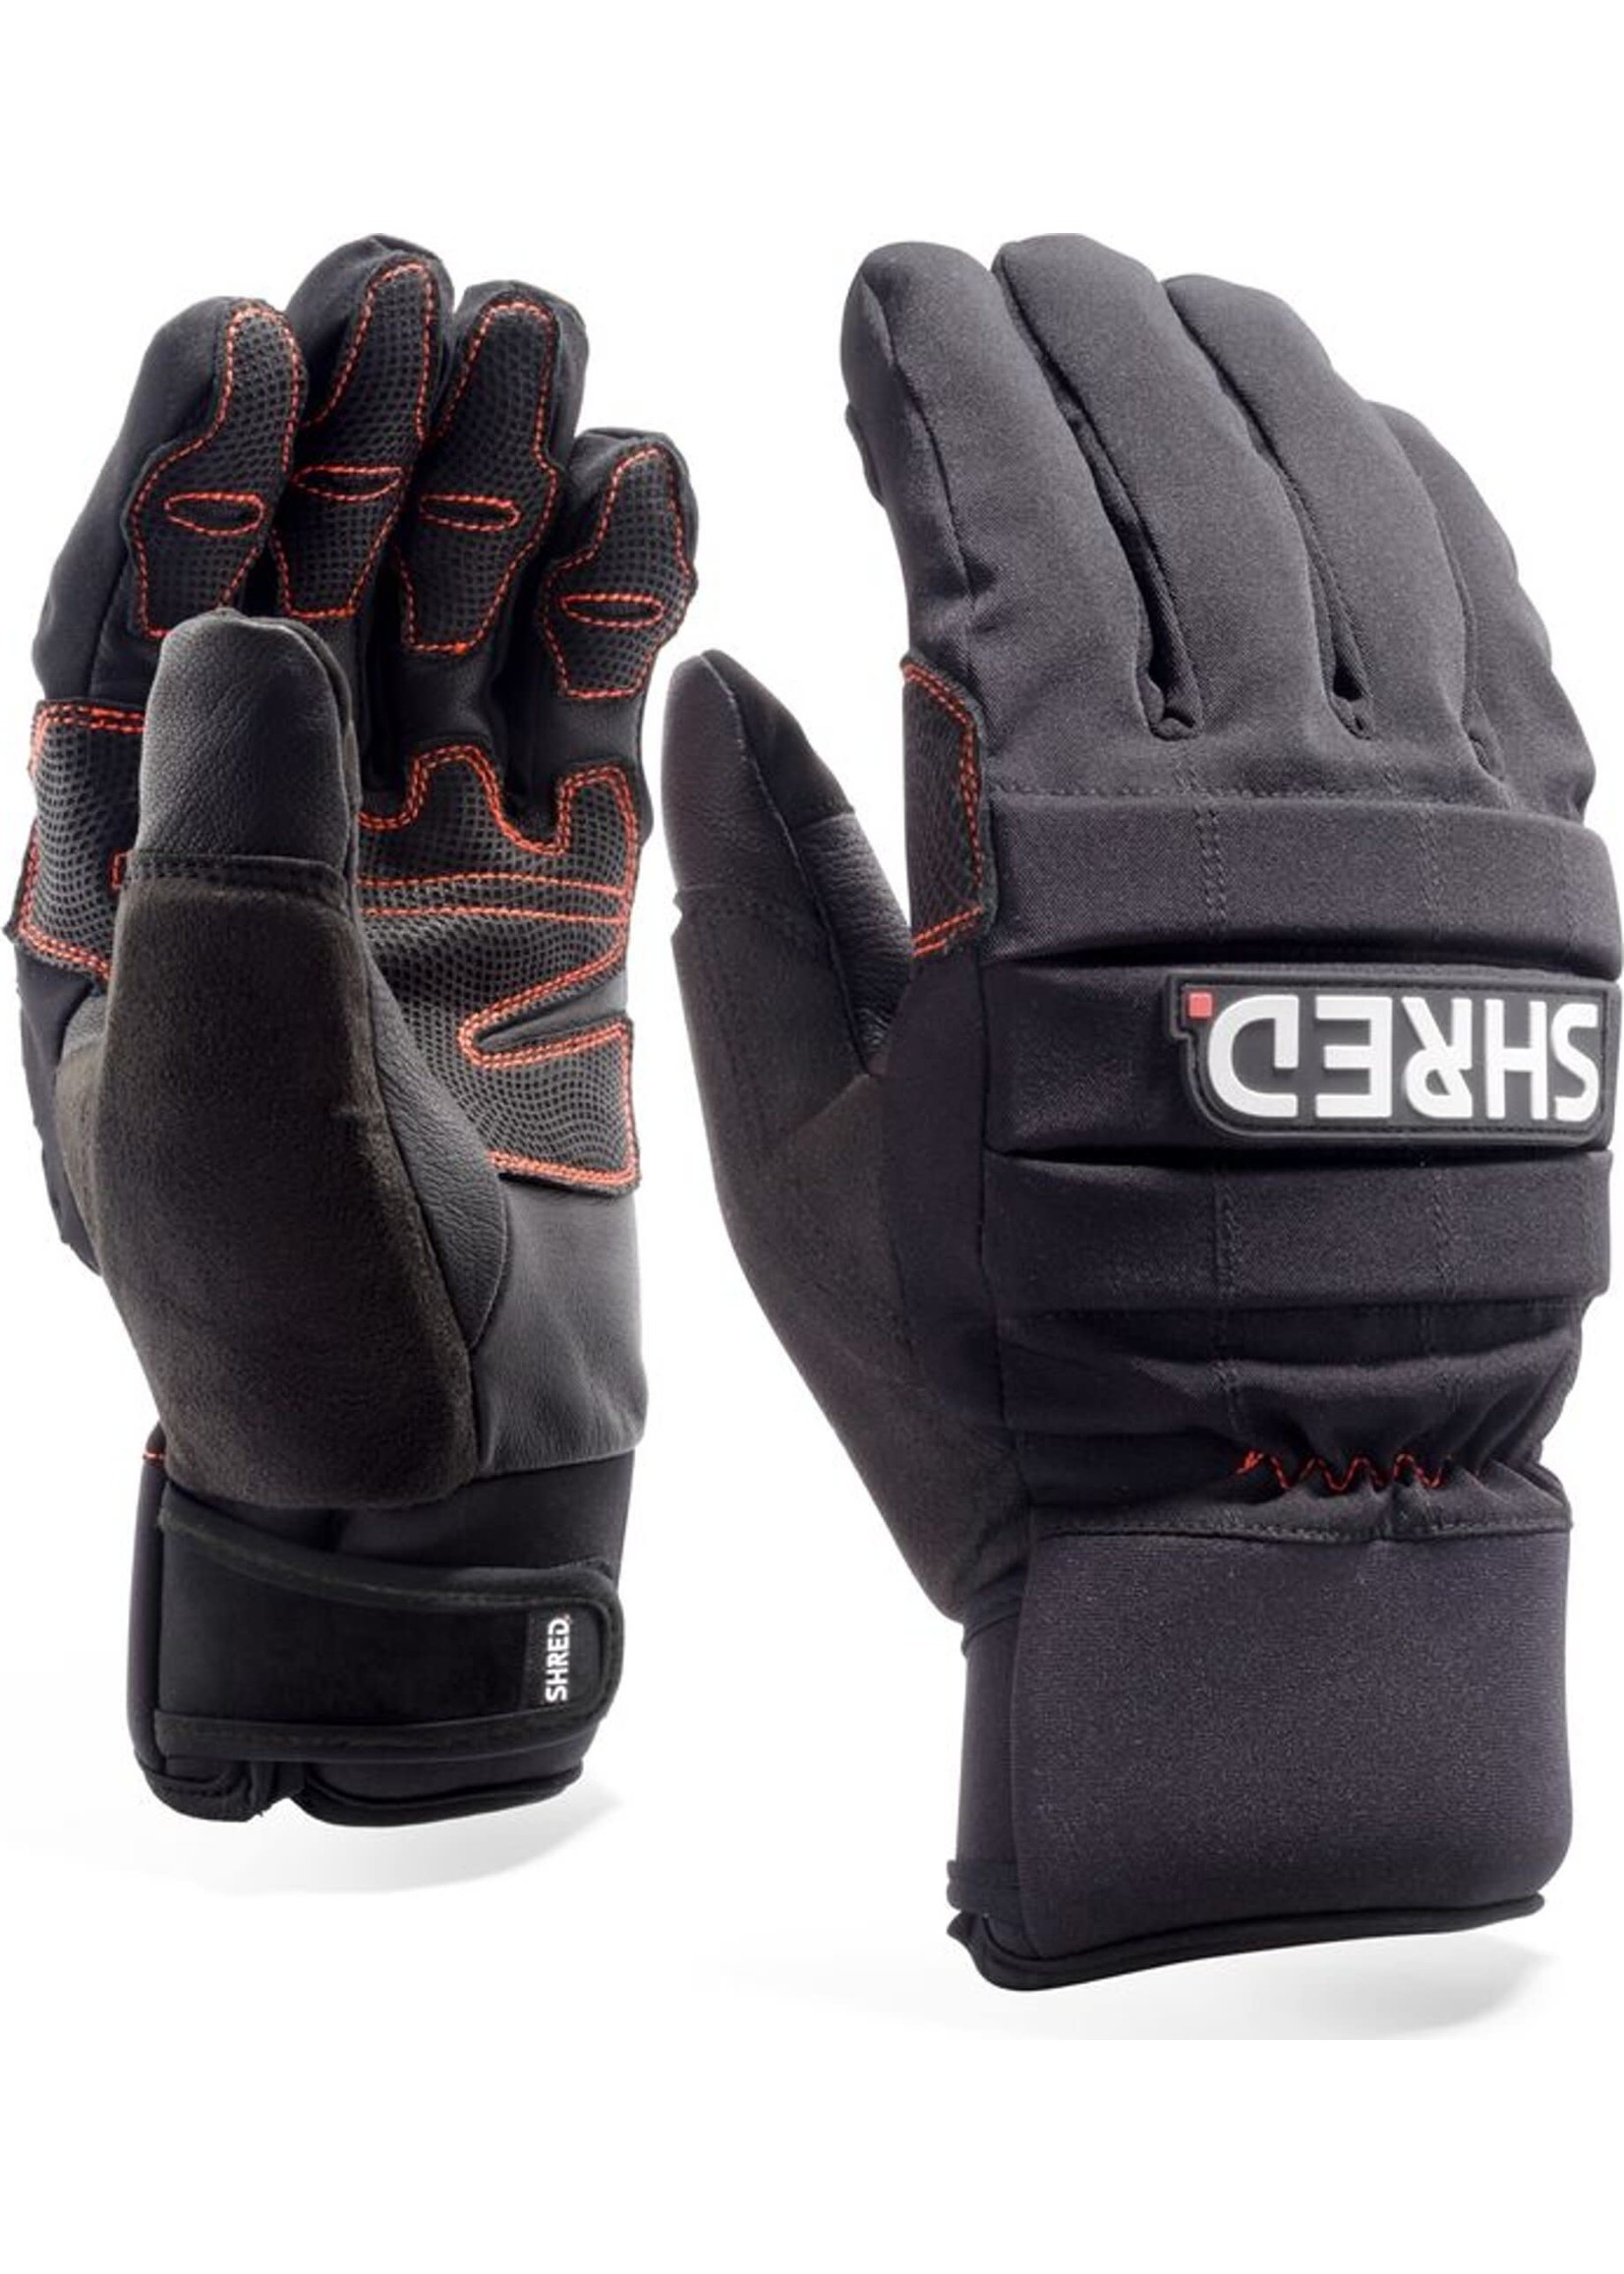 Shred Shred All Mountain Protective Gloves